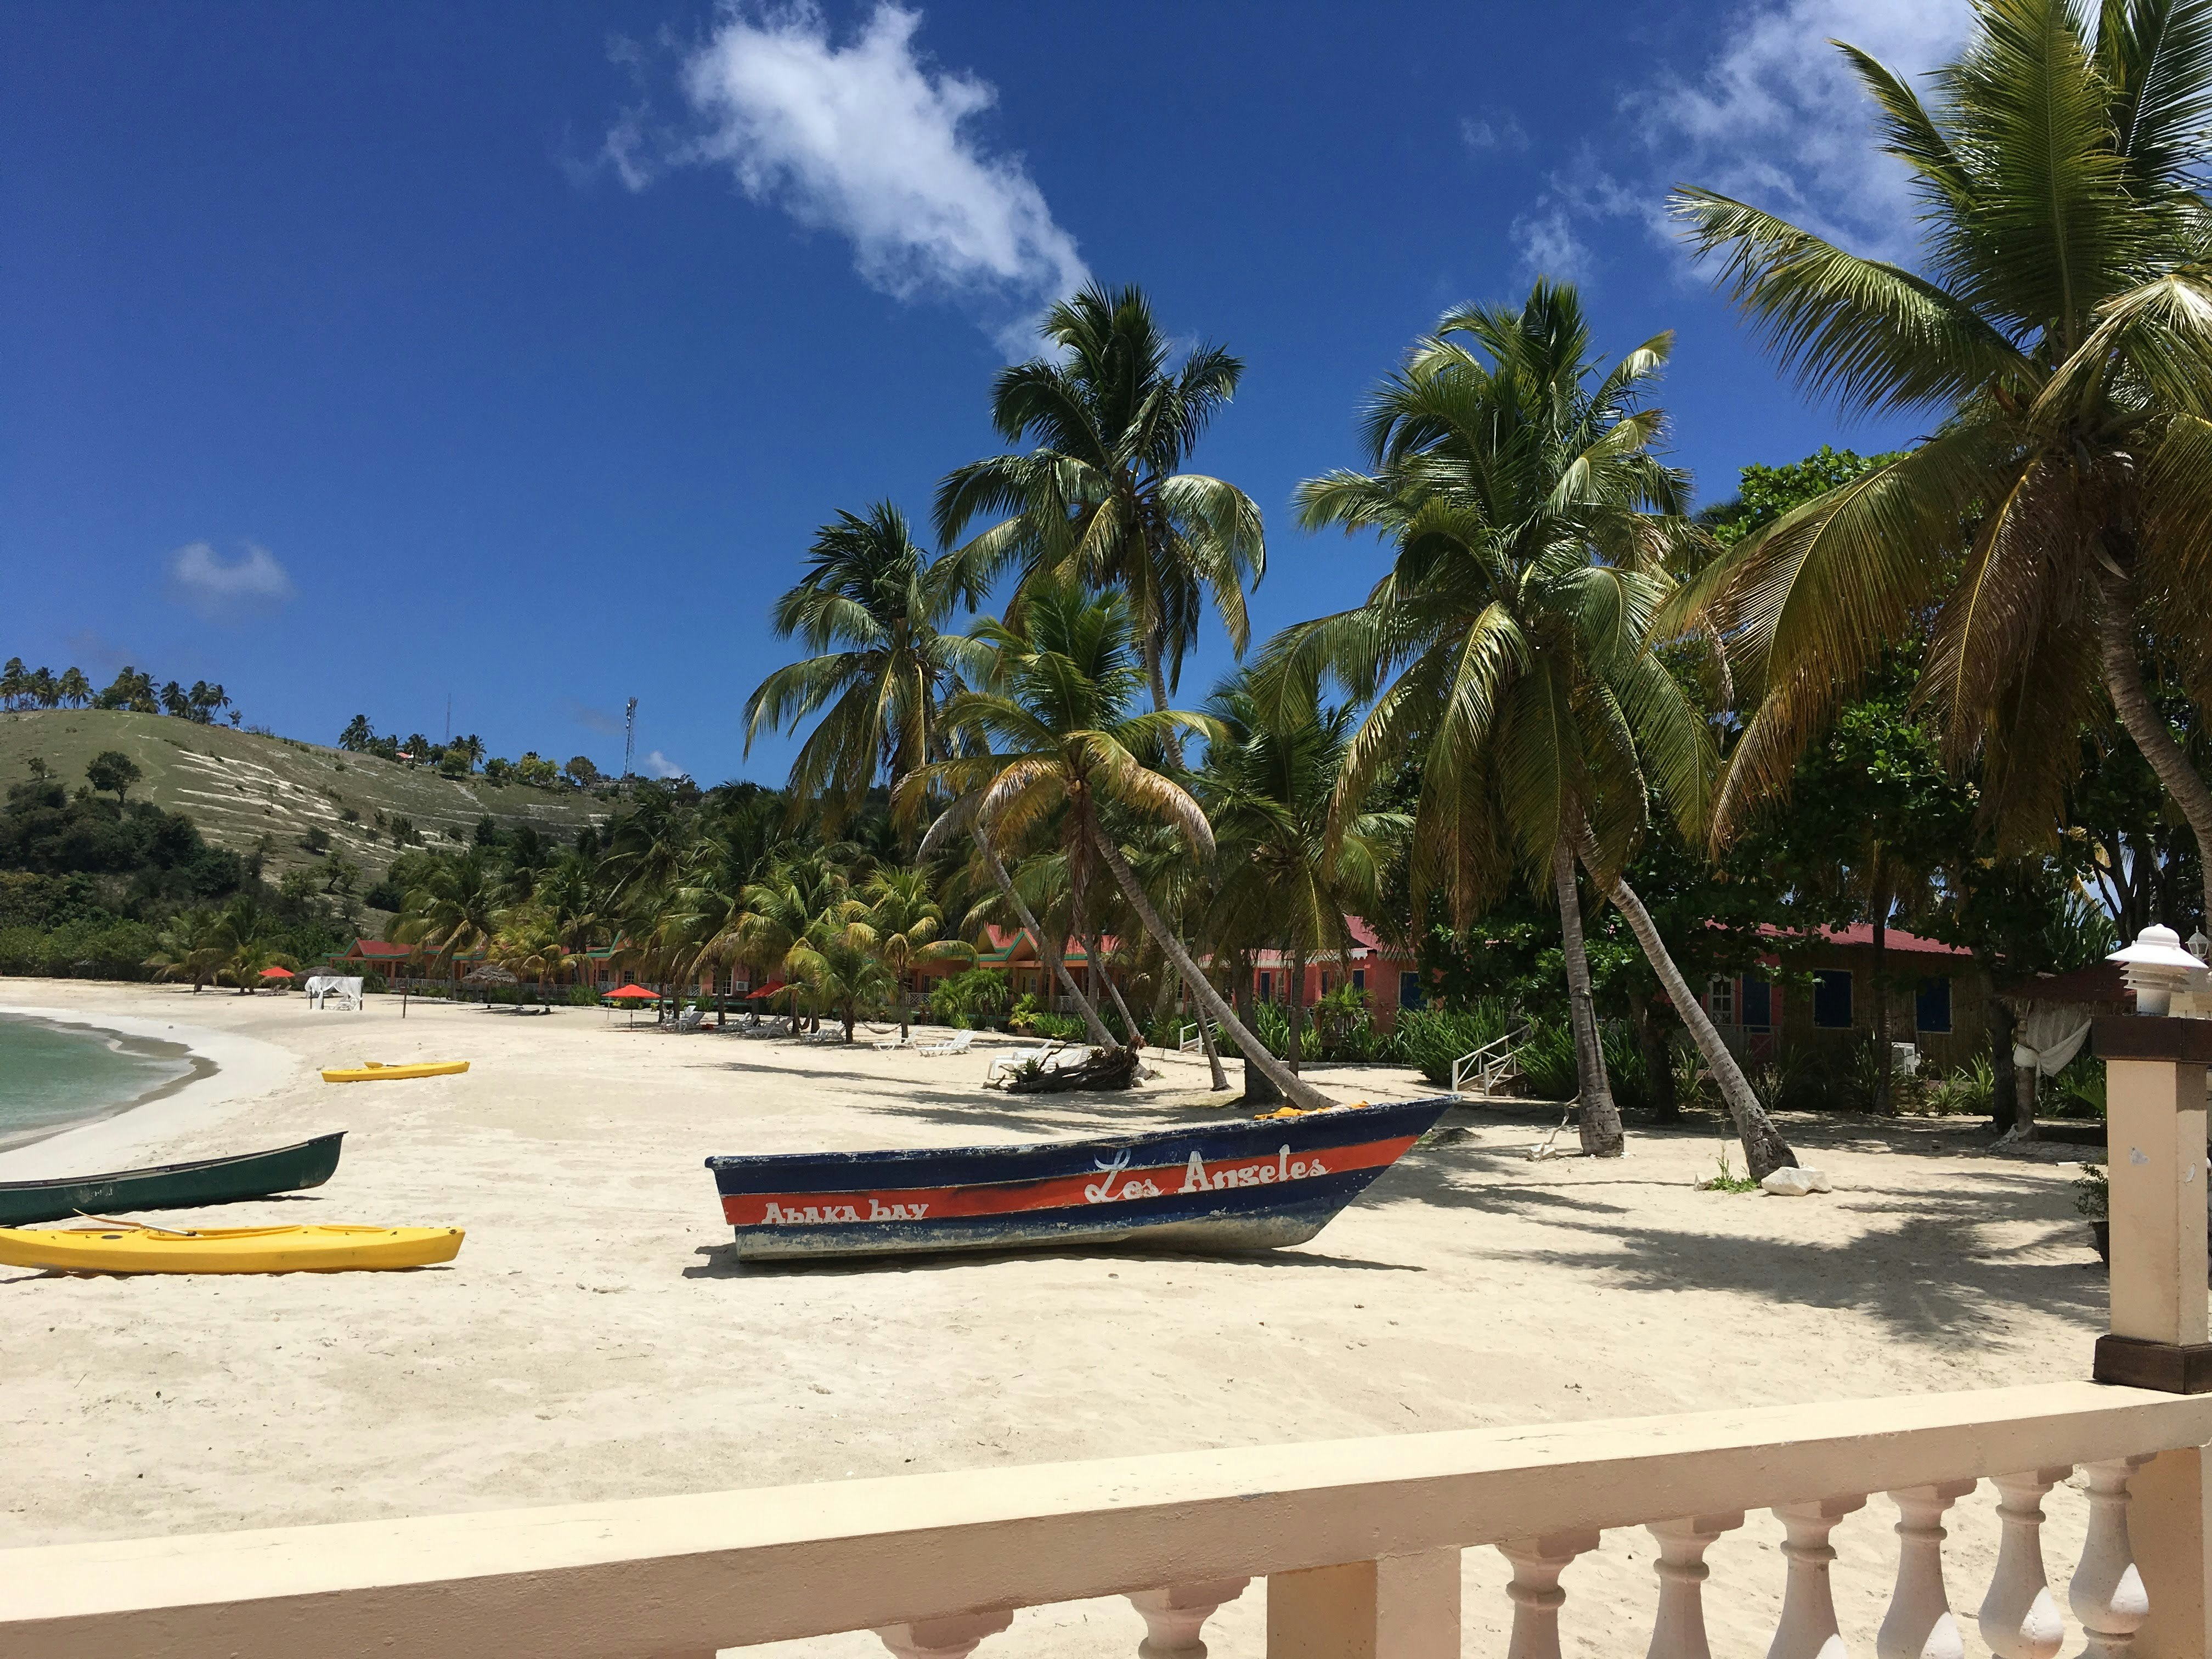 Ile a Vache is one of Haiti's satellite islands located on Haiti's southern tip. Abaka Bay Resort has an amazing white sand beach with  clear, calm waters. 